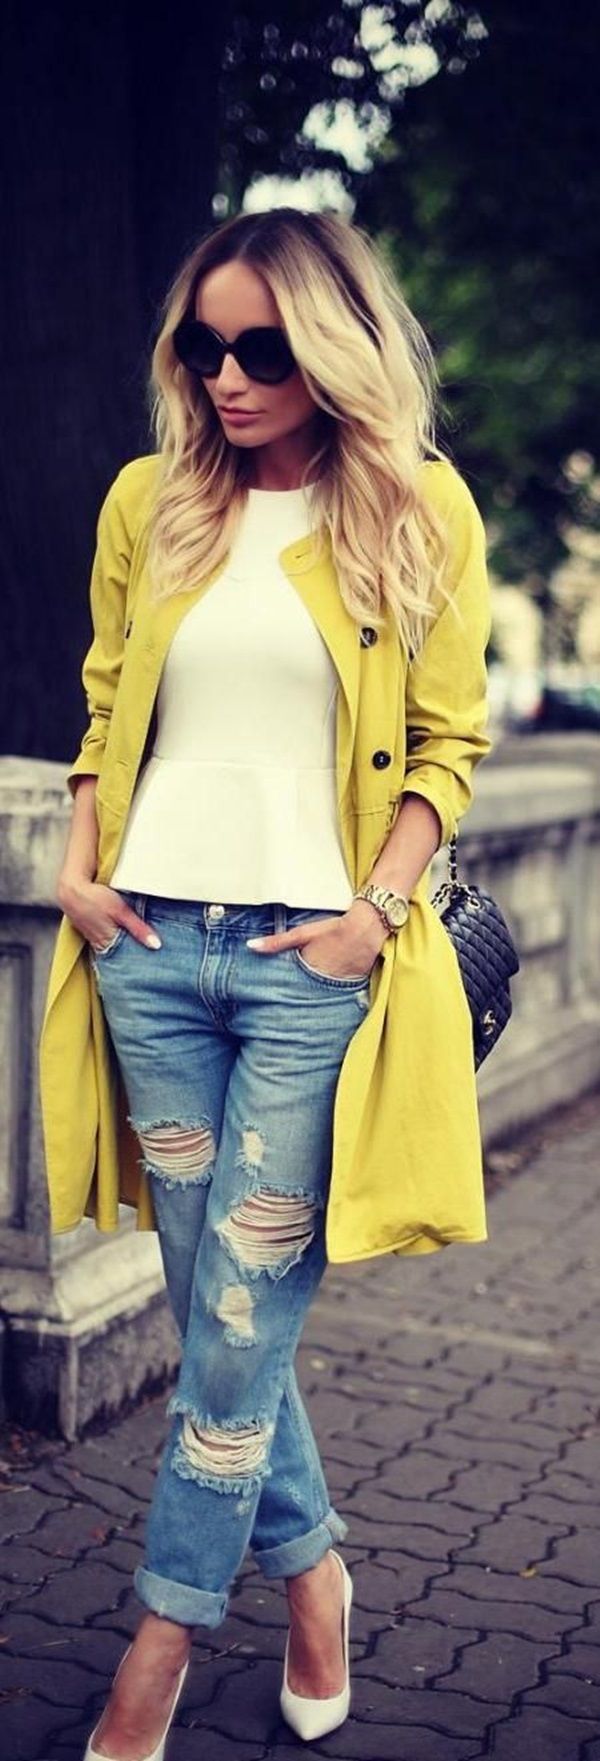 Casual Inspiration For The Perfect Combination - women, woman, trendy, style, street, shirt, jeans, jacket, inspiration, fashion, chic, casual